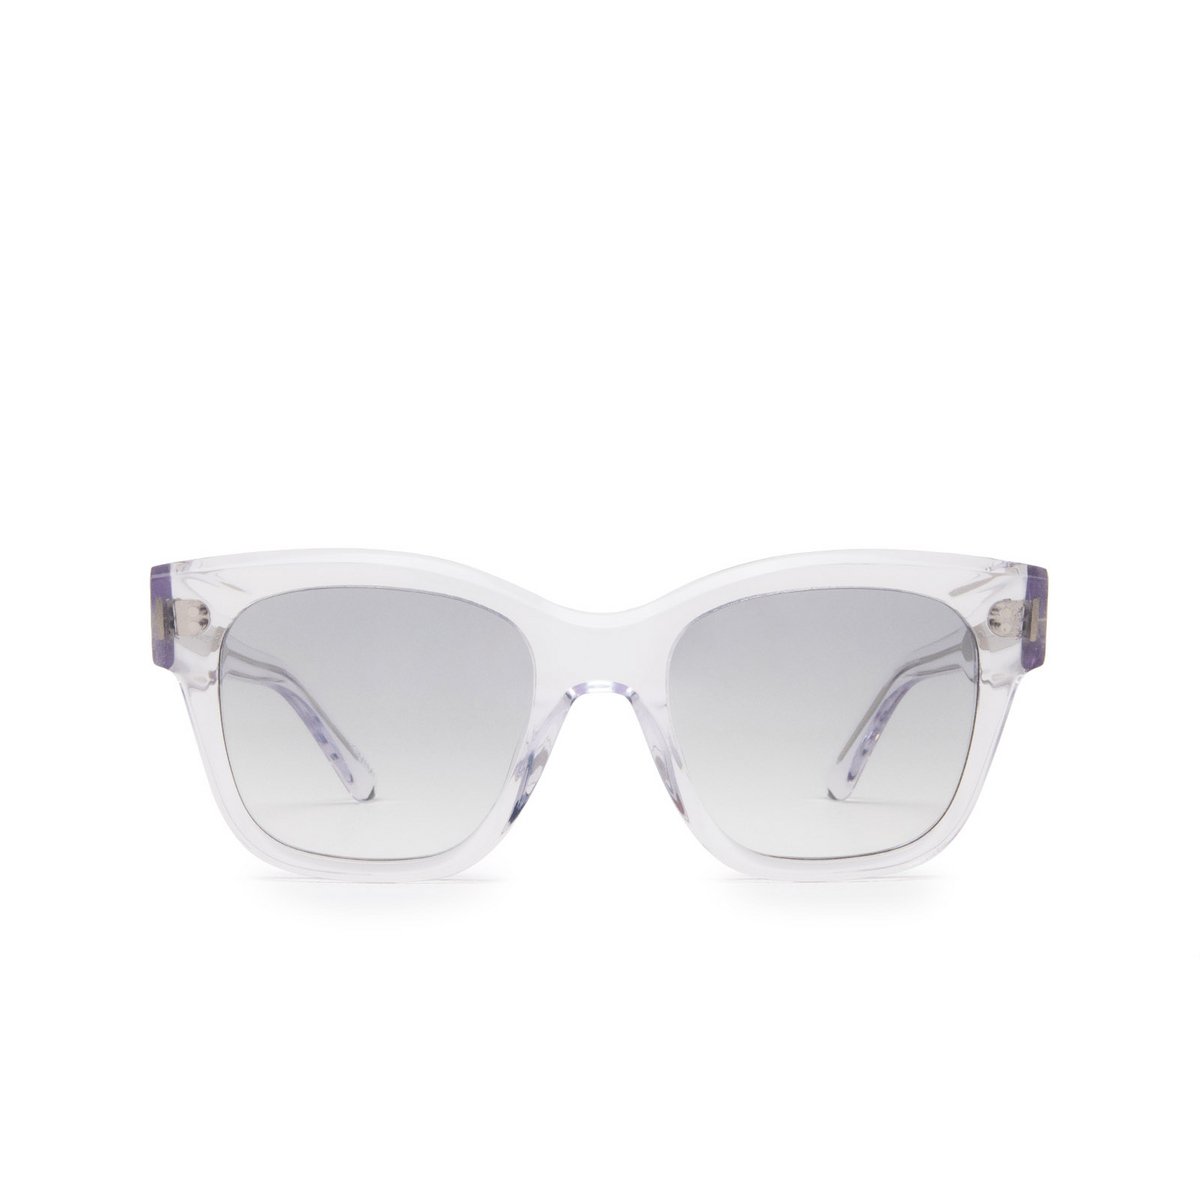 Chimi® Butterfly Sunglasses: 07 color Clear - front view